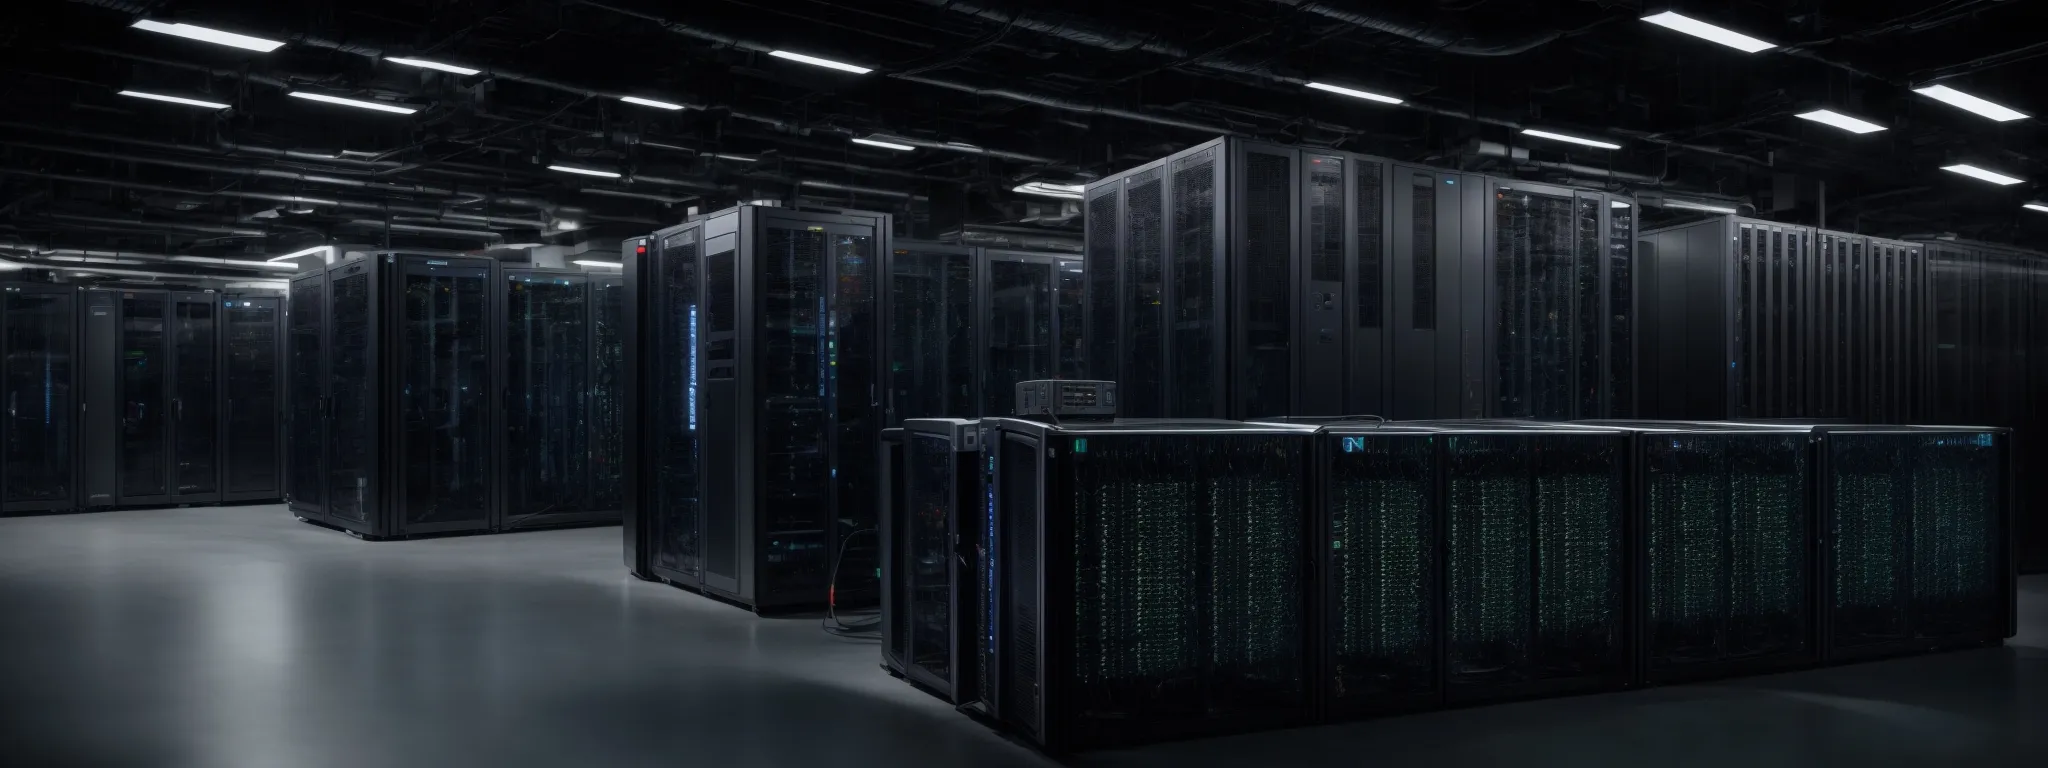 a data center with server racks indicating high-performance hosting environments.